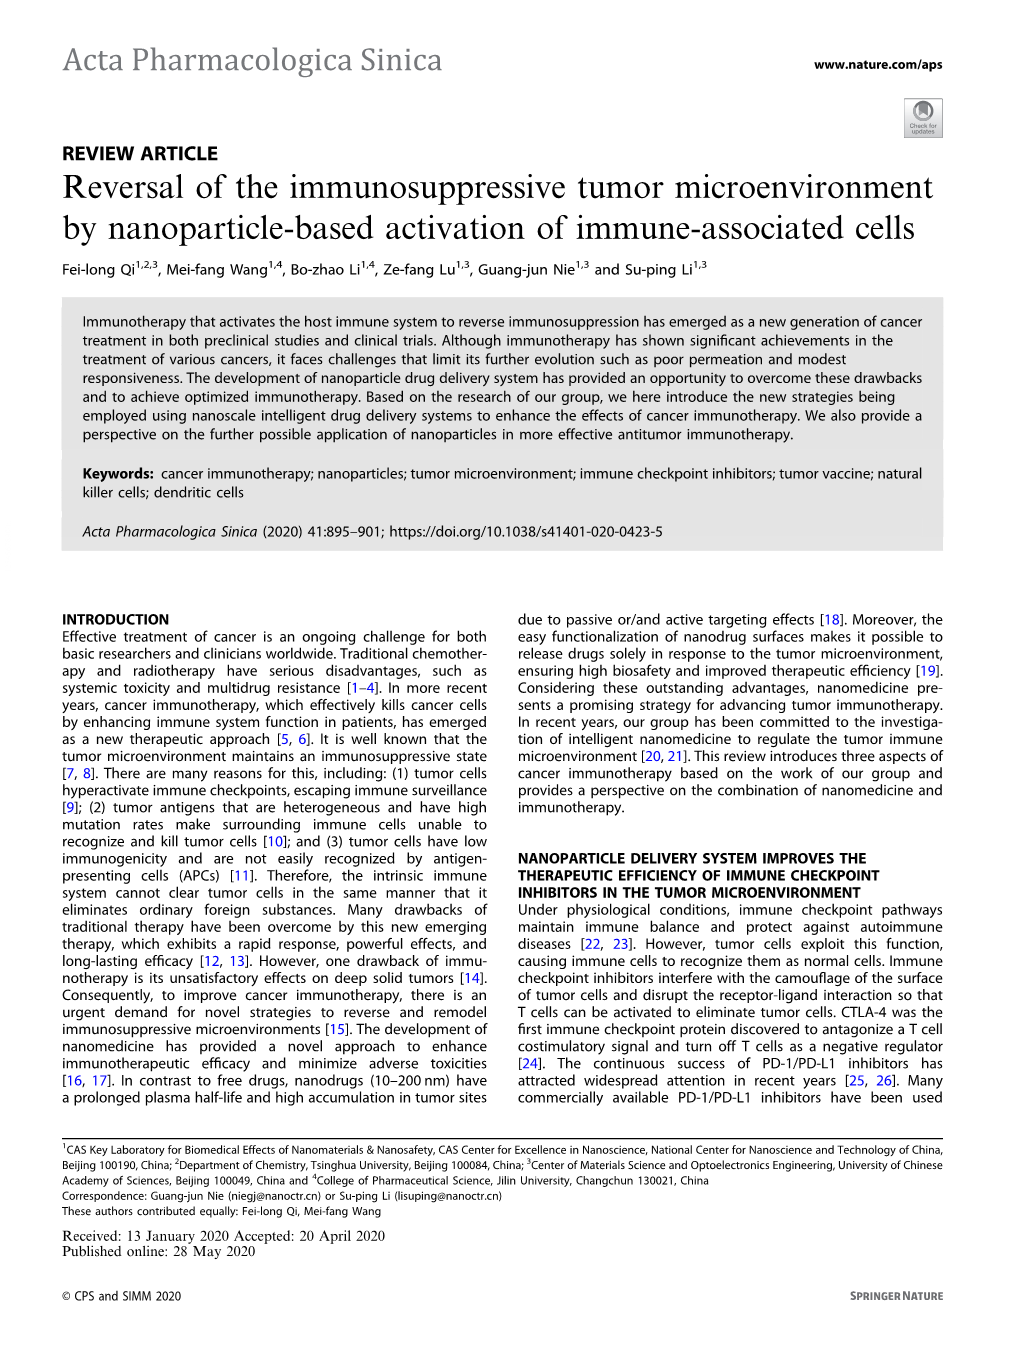 Reversal of the Immunosuppressive Tumor Microenvironment by Nanoparticle-Based Activation of Immune-Associated Cells